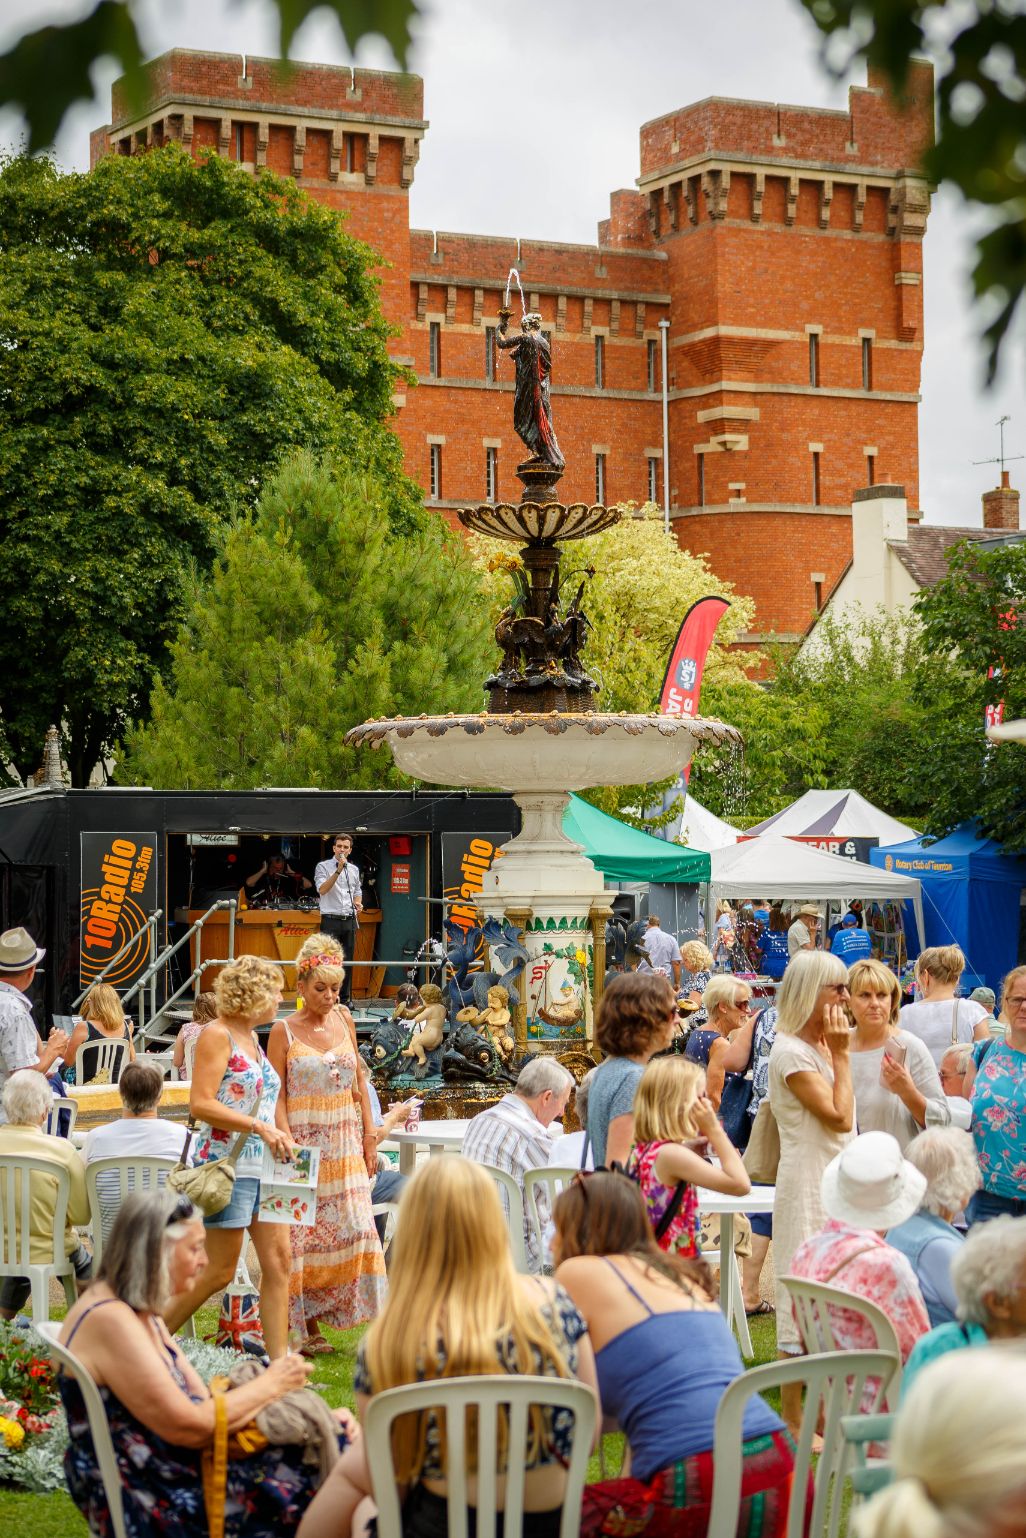 Image of Vivary Park from the fountain area, showing people enjoying music and food.